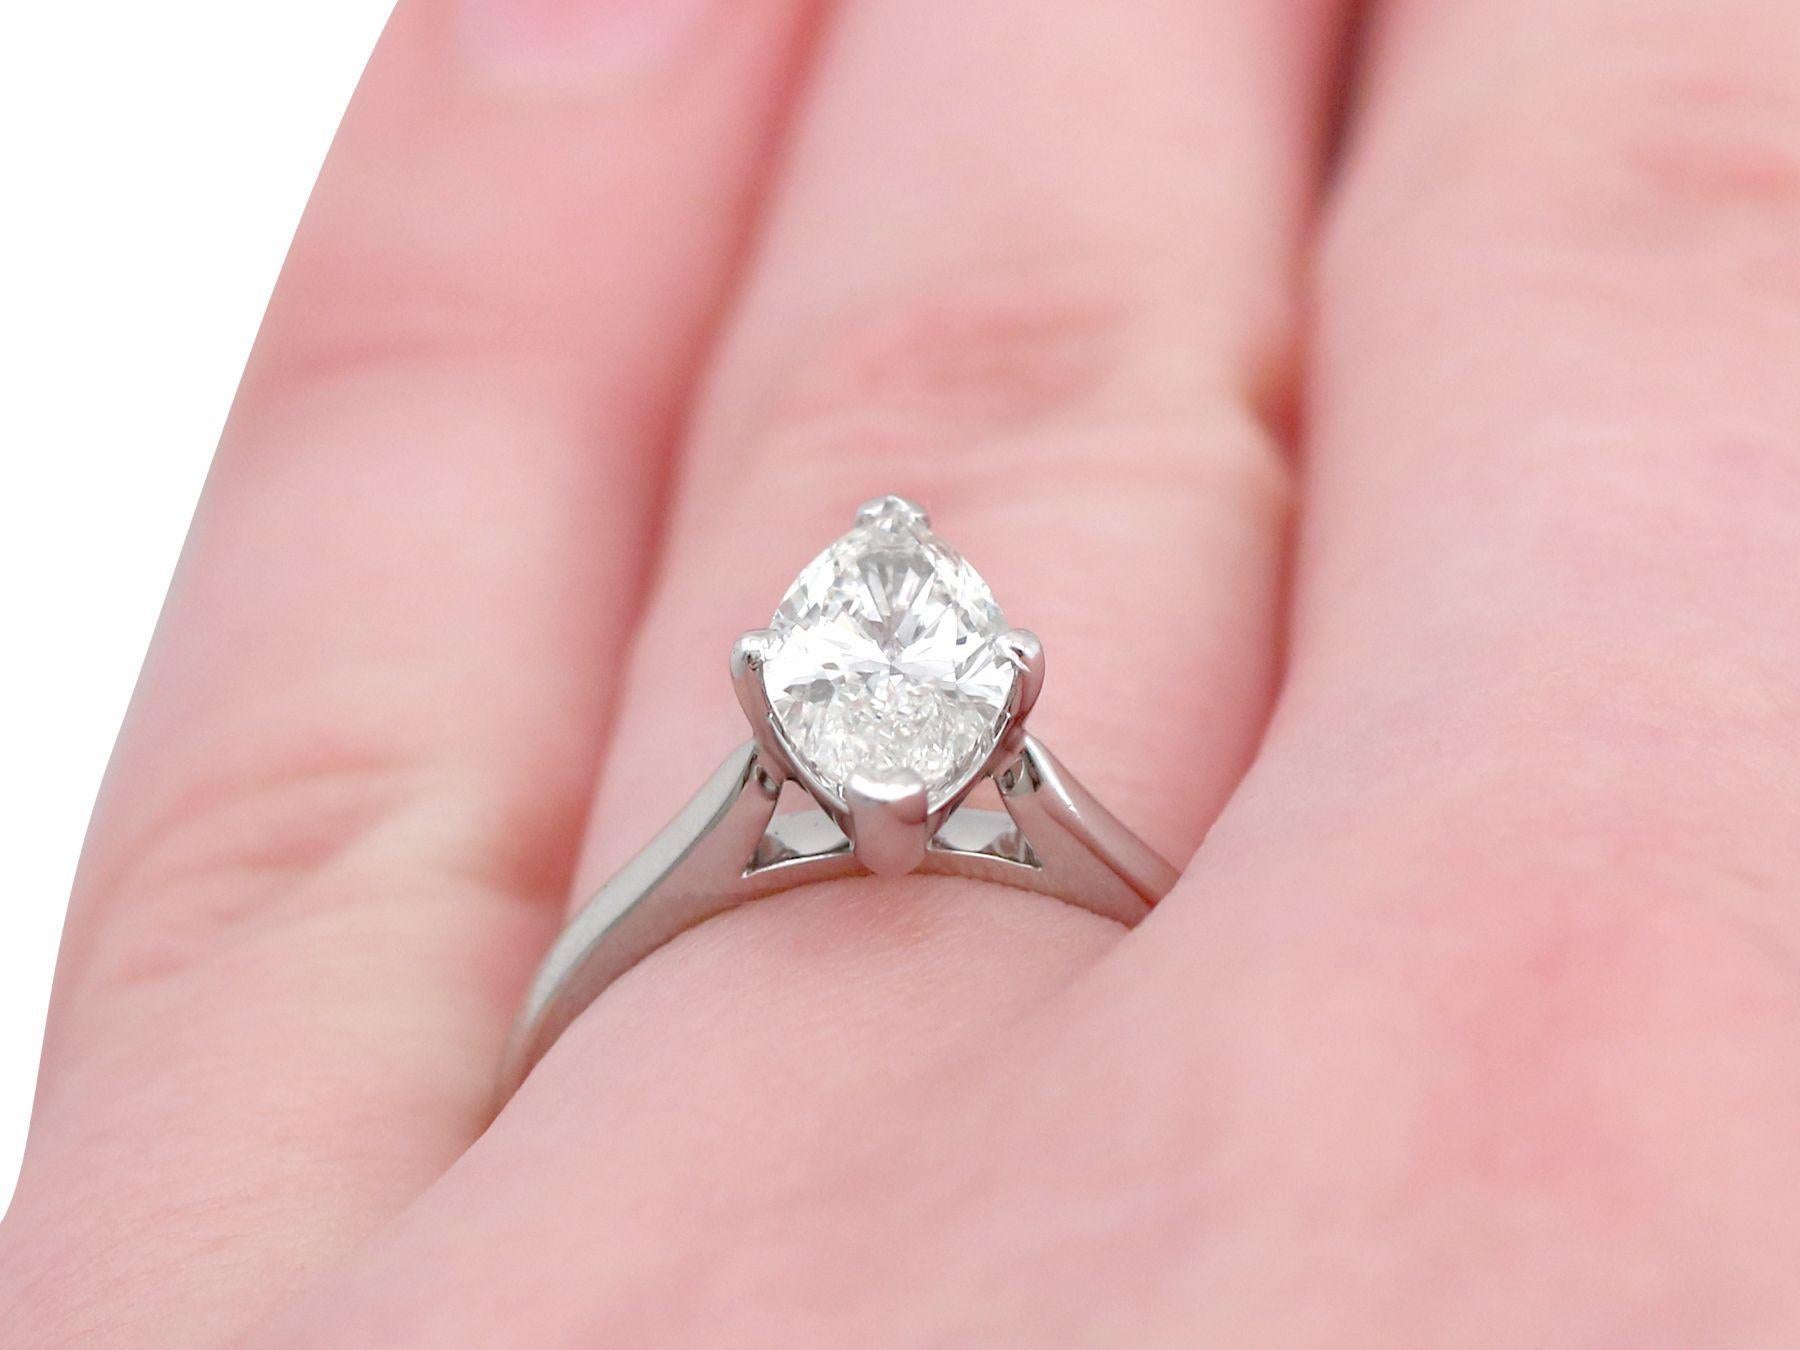 Women's 1980s 1.41 Carat Diamond and White Gold Solitaire Ring For Sale